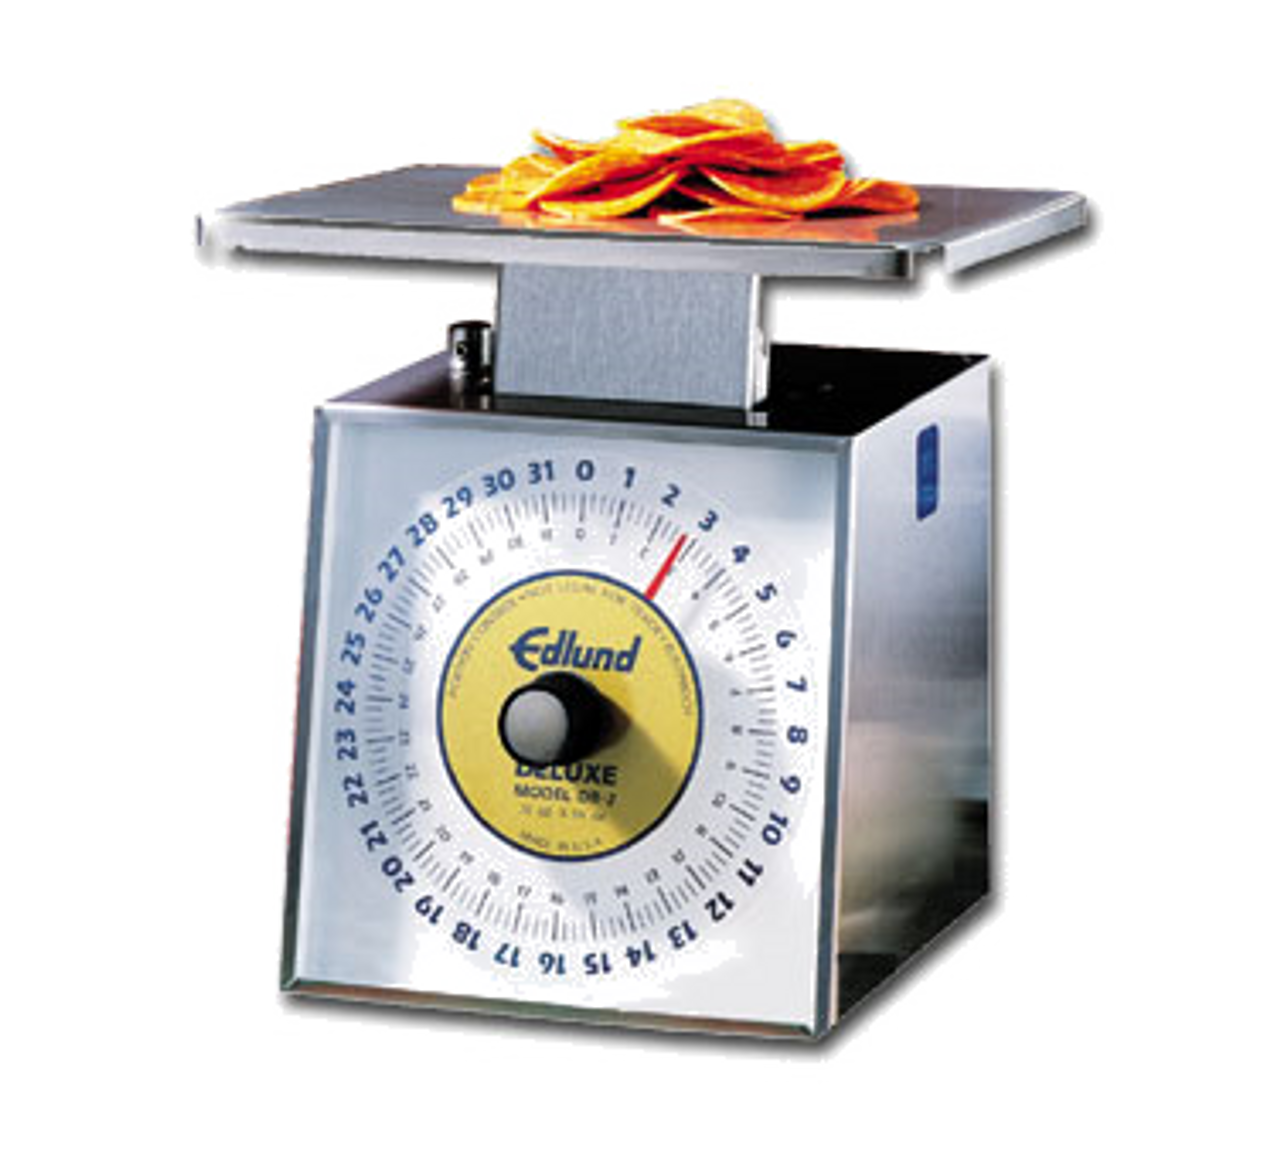 Scale, Portion, Dial Type, dishwasher safe, top loading counter model, rotating dial, vertical face, 5 lbs x 1 oz graduation, stainless steel construction, NSF certified, made in USA. SR-5 OP Pictured